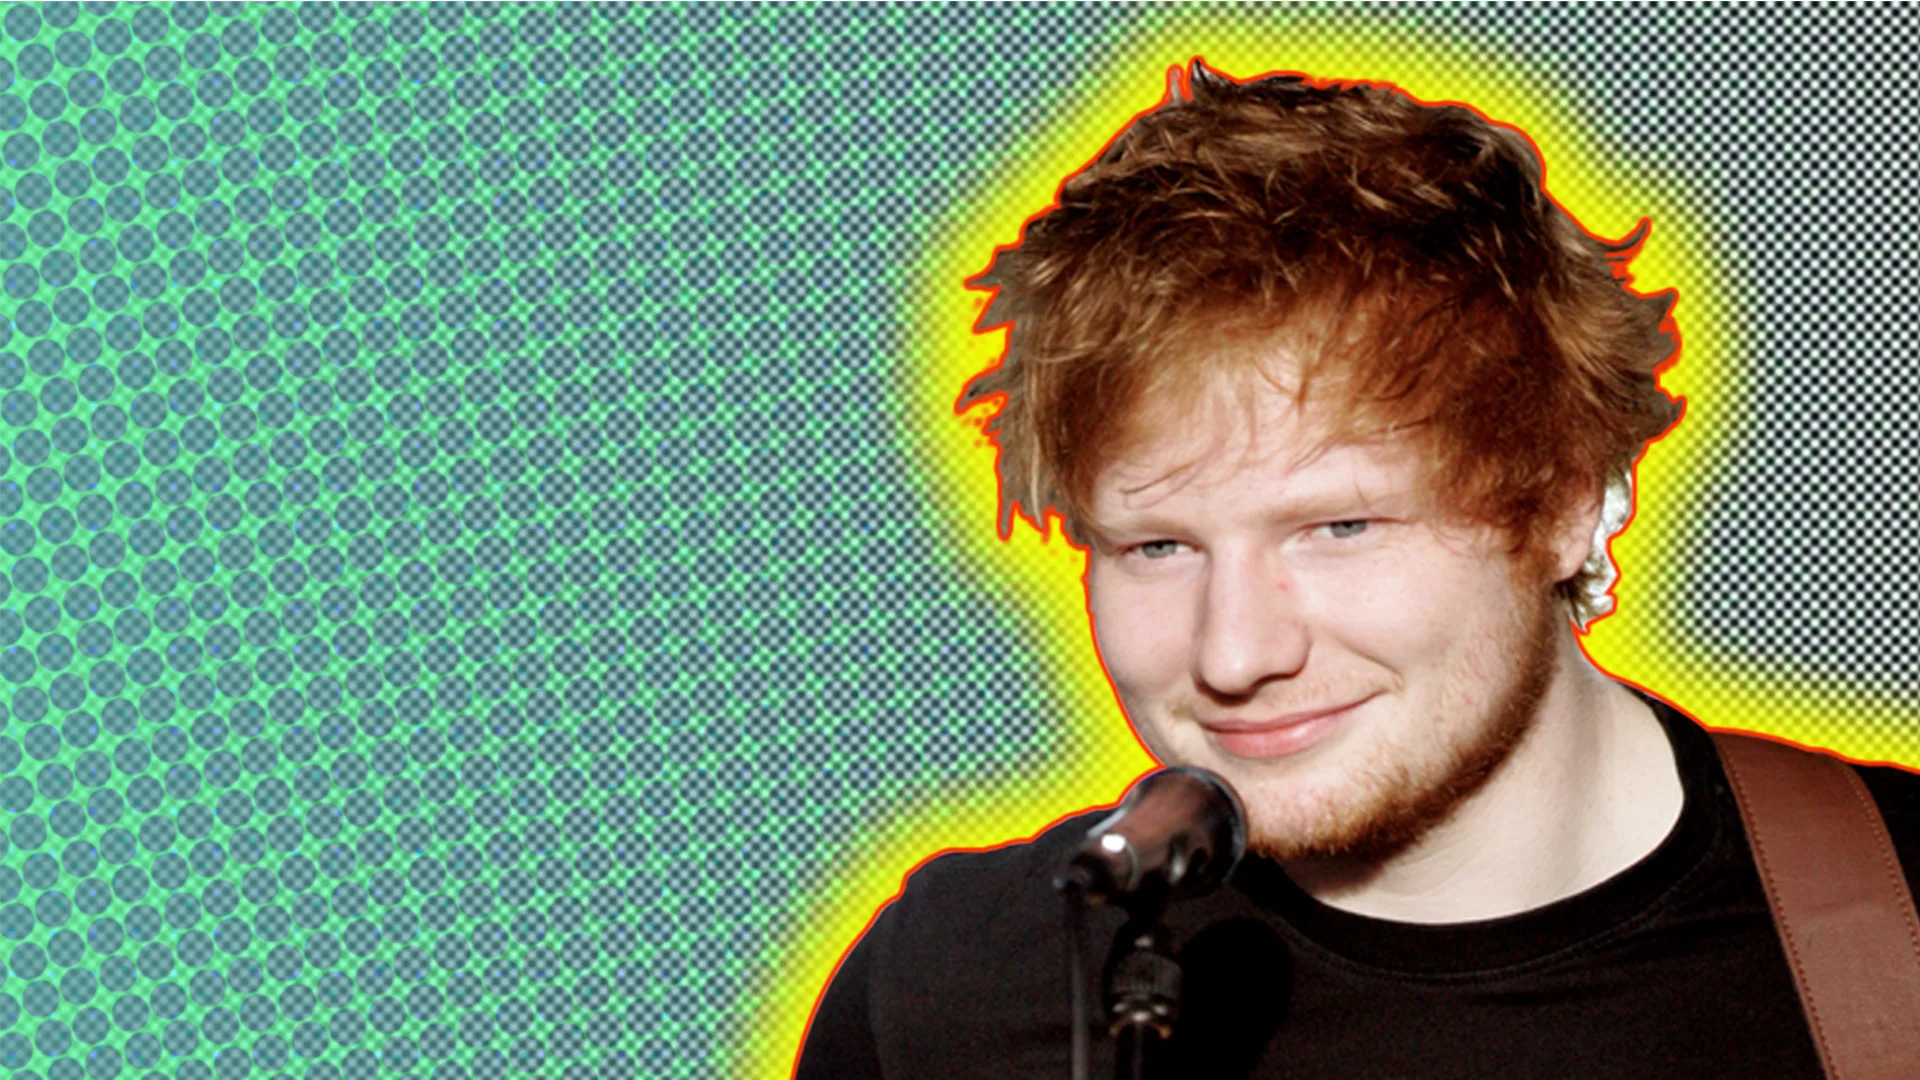 Ed Sheeran with a mic - in graphic house style